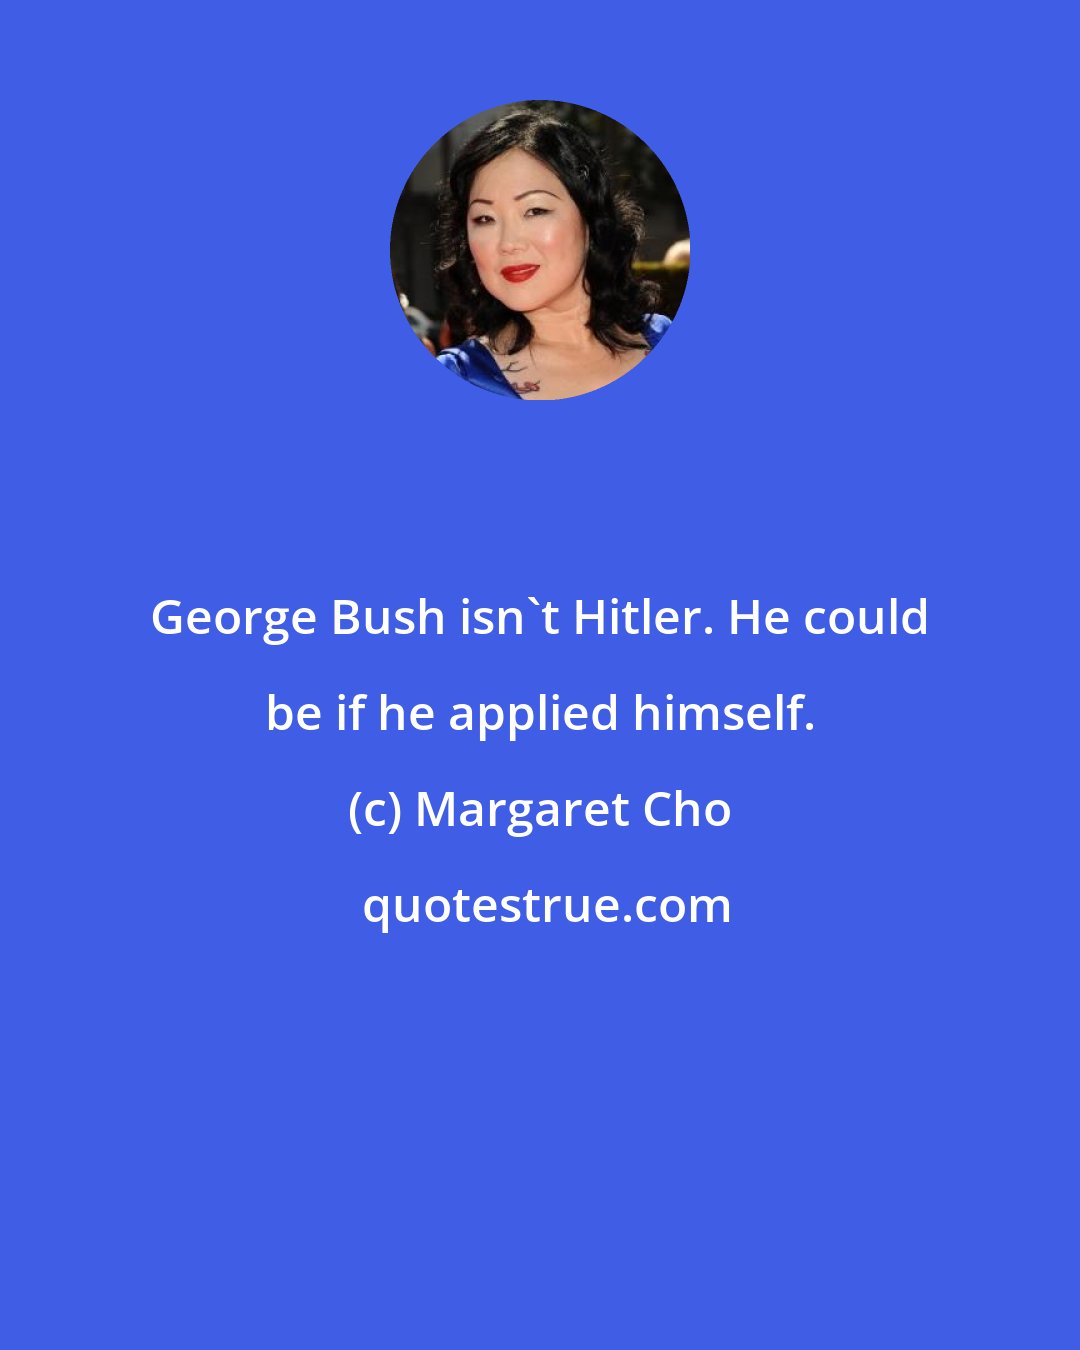 Margaret Cho: George Bush isn't Hitler. He could be if he applied himself.